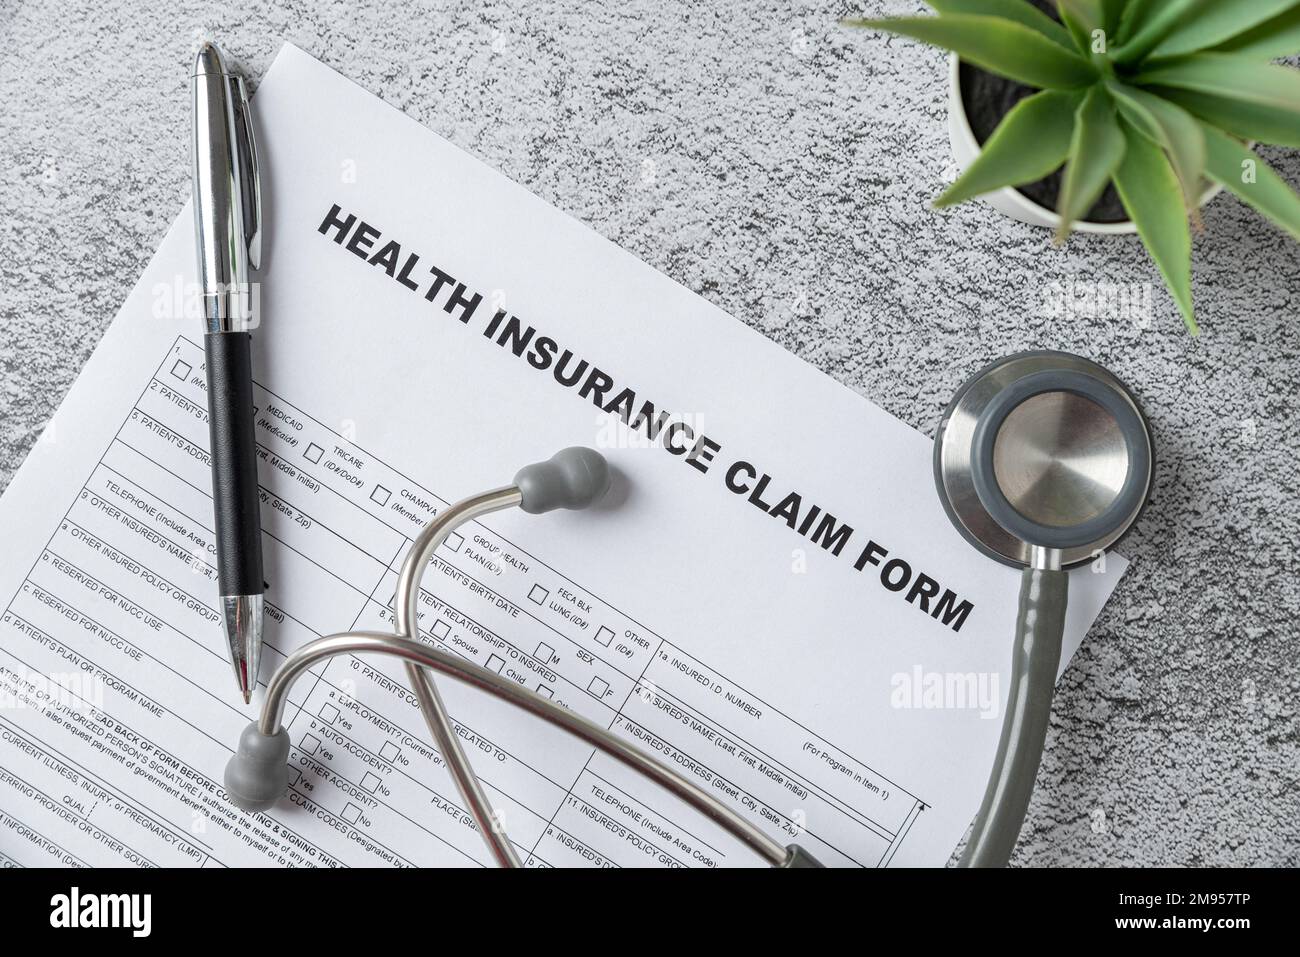 Top view of doctor stethoscope, pen and health insurance claim form on table Stock Photo